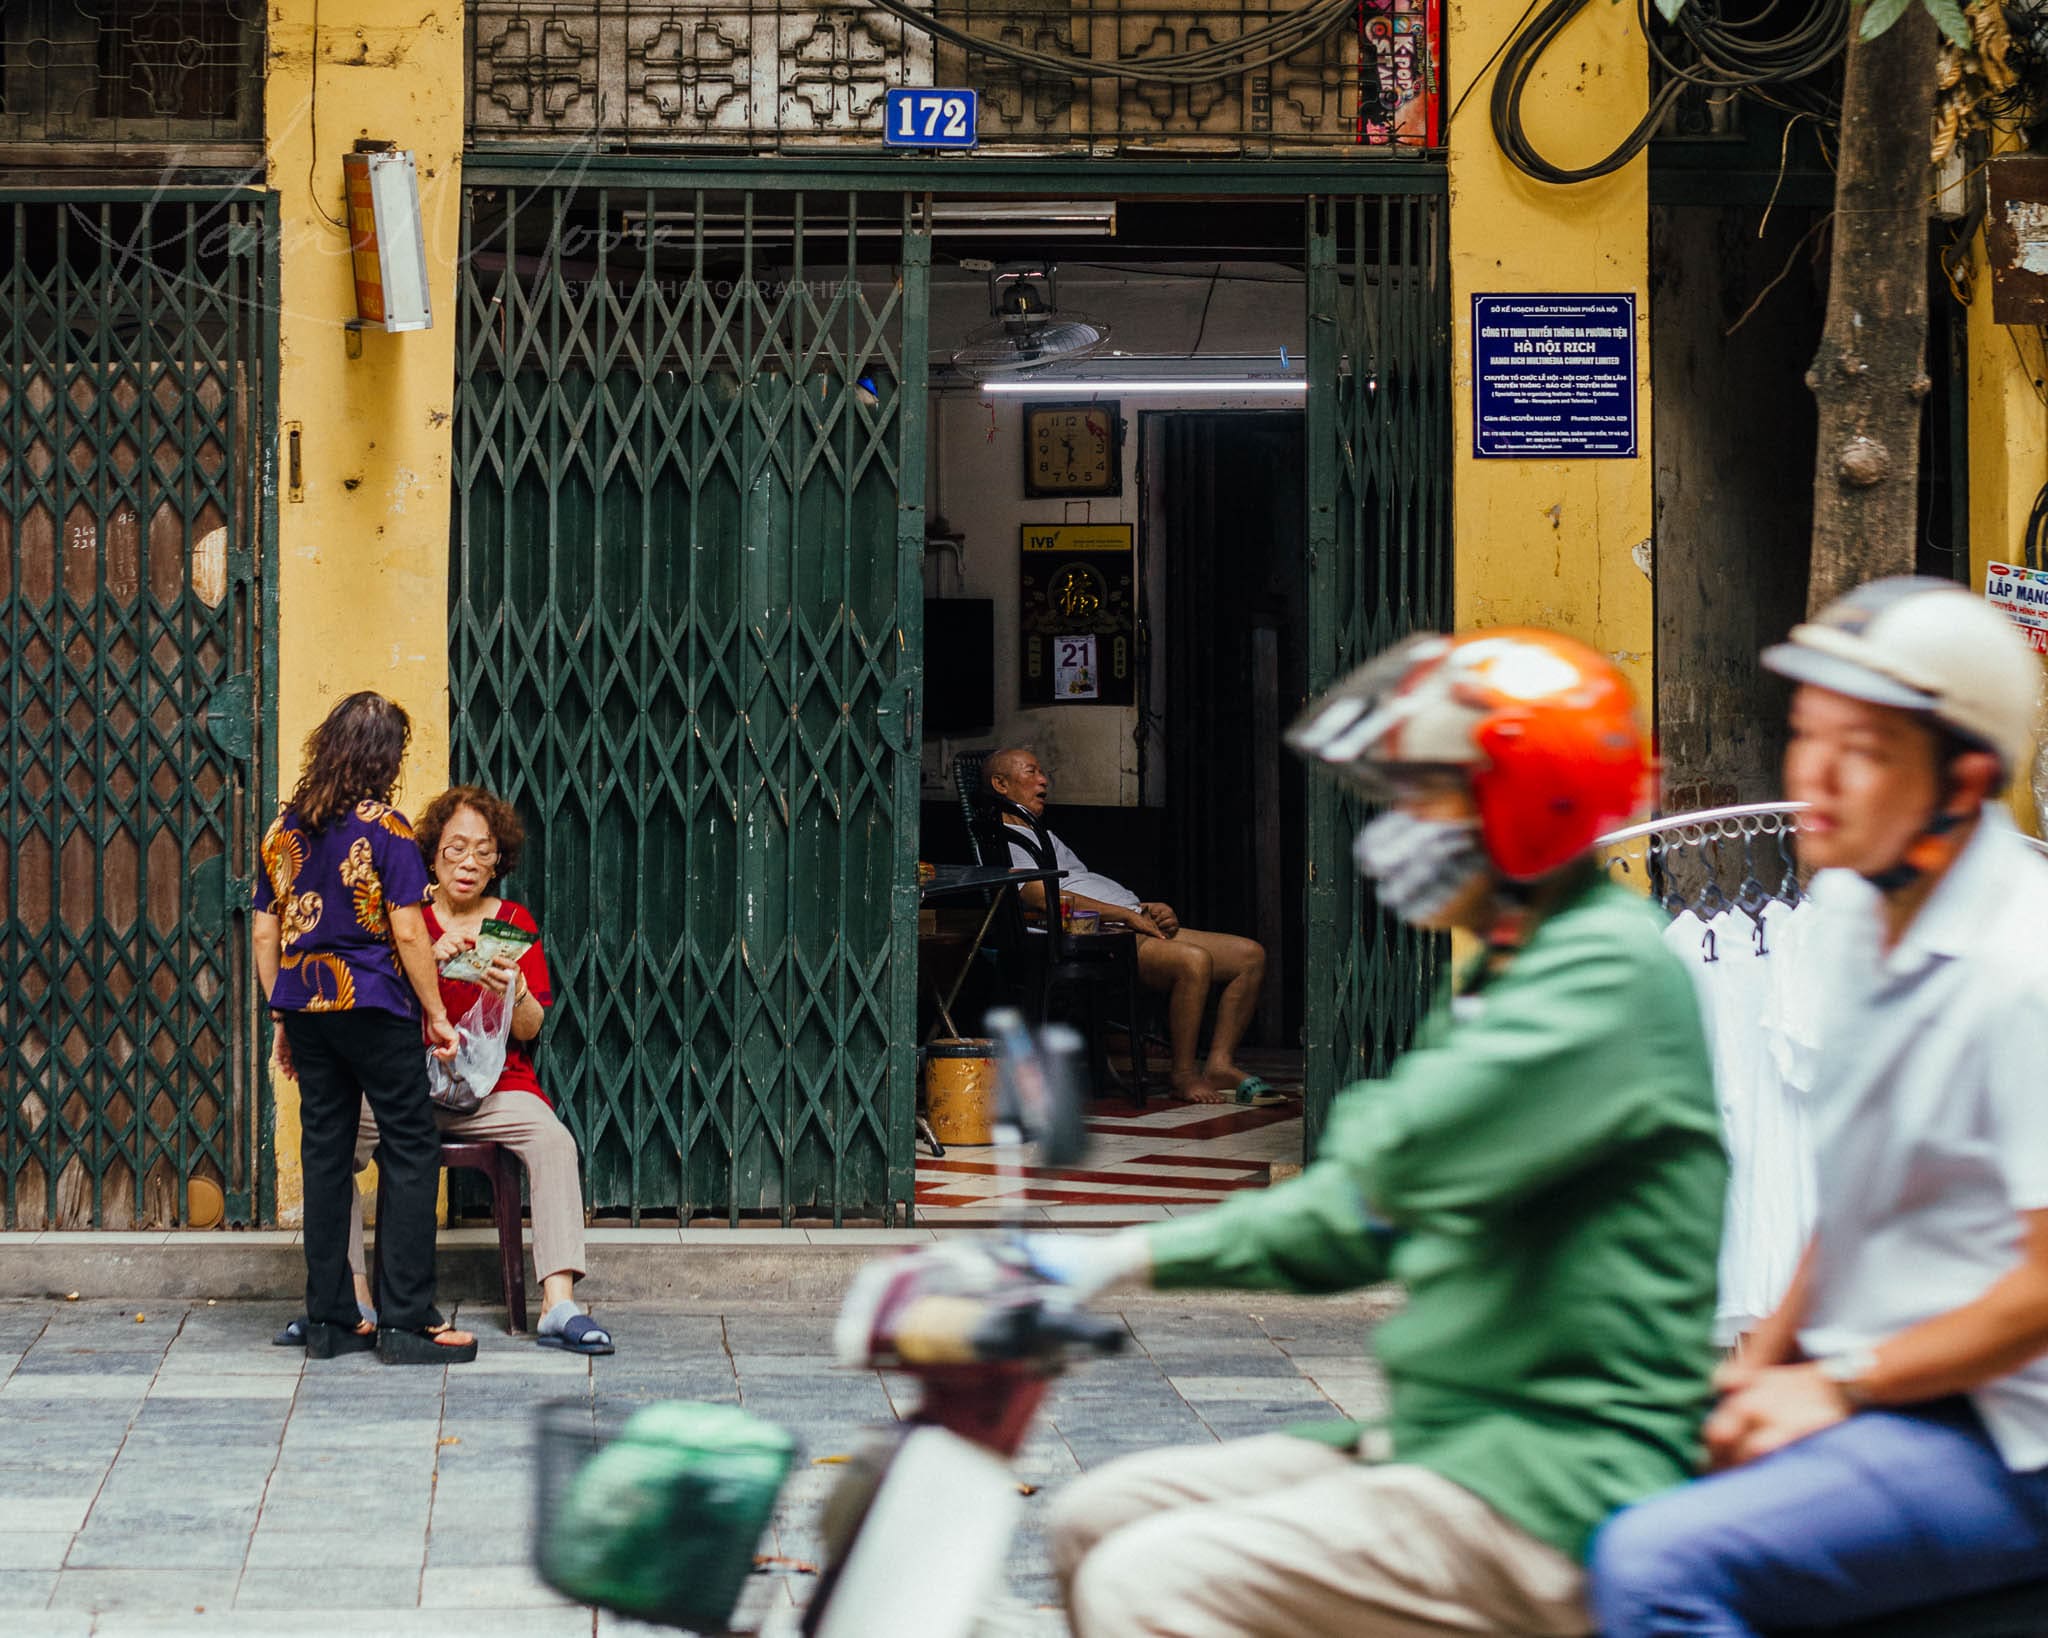 Motorbikes in motion and locals relaxing on a vibrant Hanoi Vietnam urban street scene.